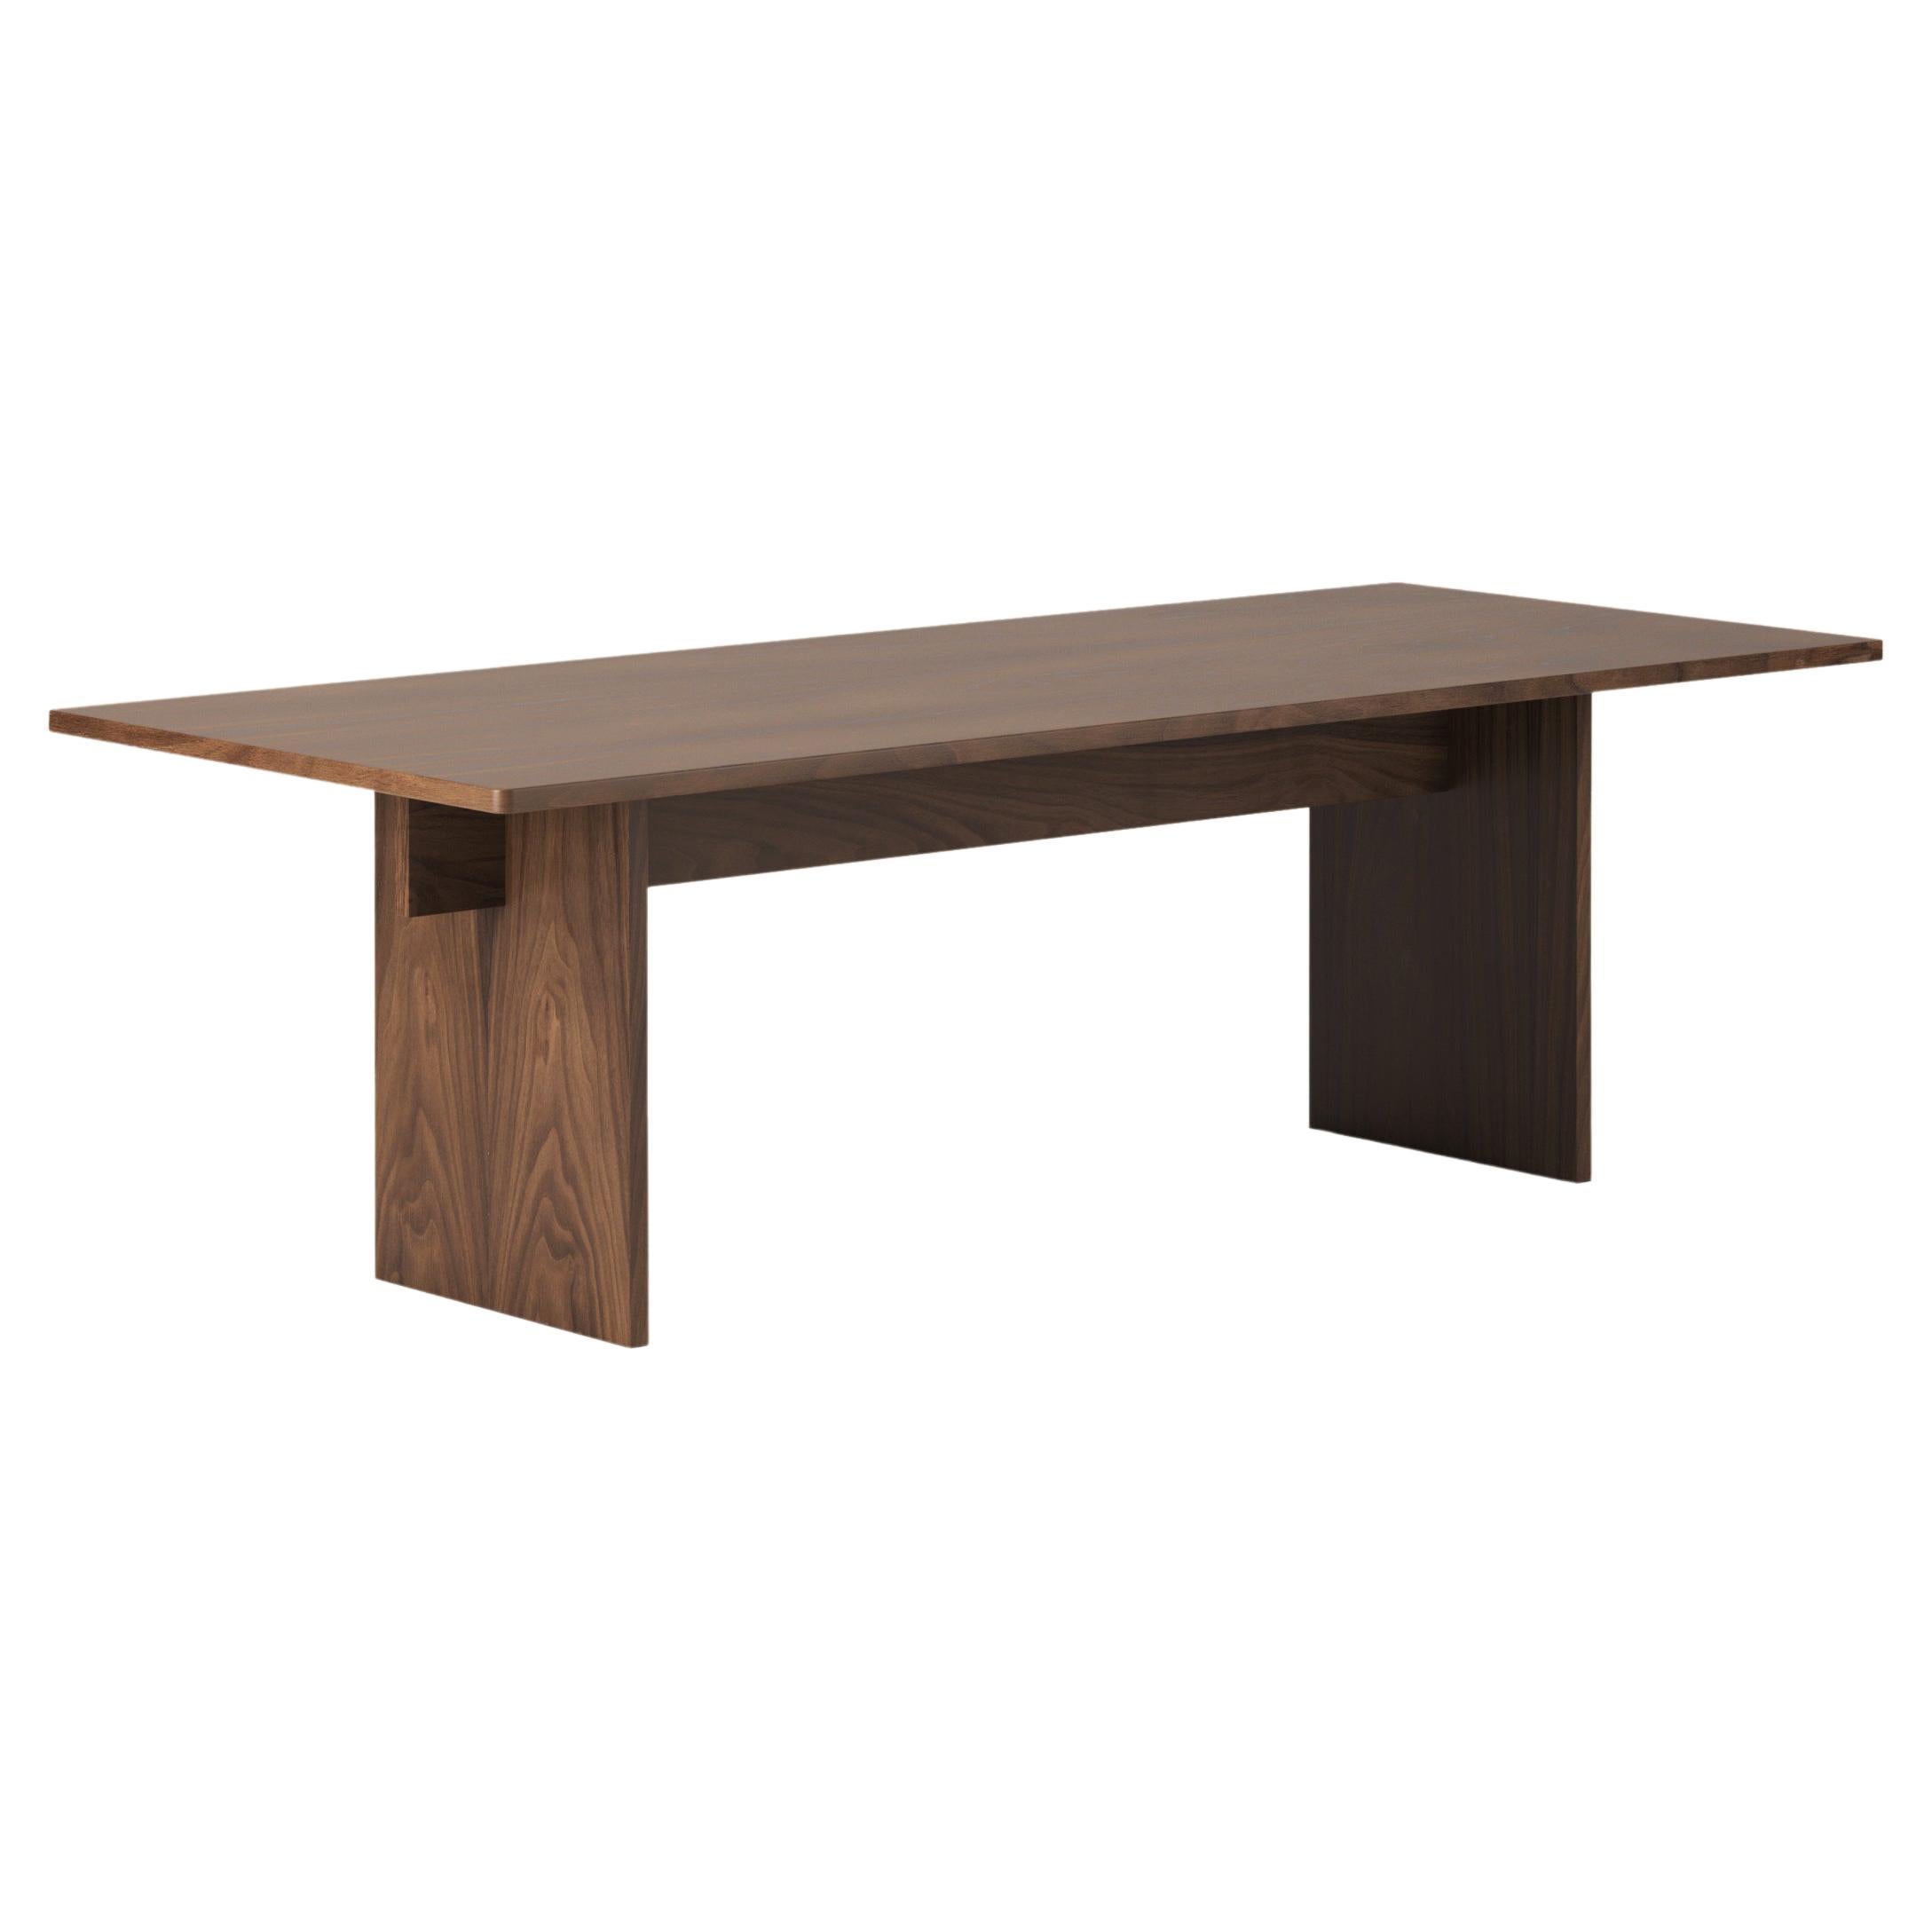 6 Seater Faure Dining Table Handcrafted in Walnut by Kevin Frankental